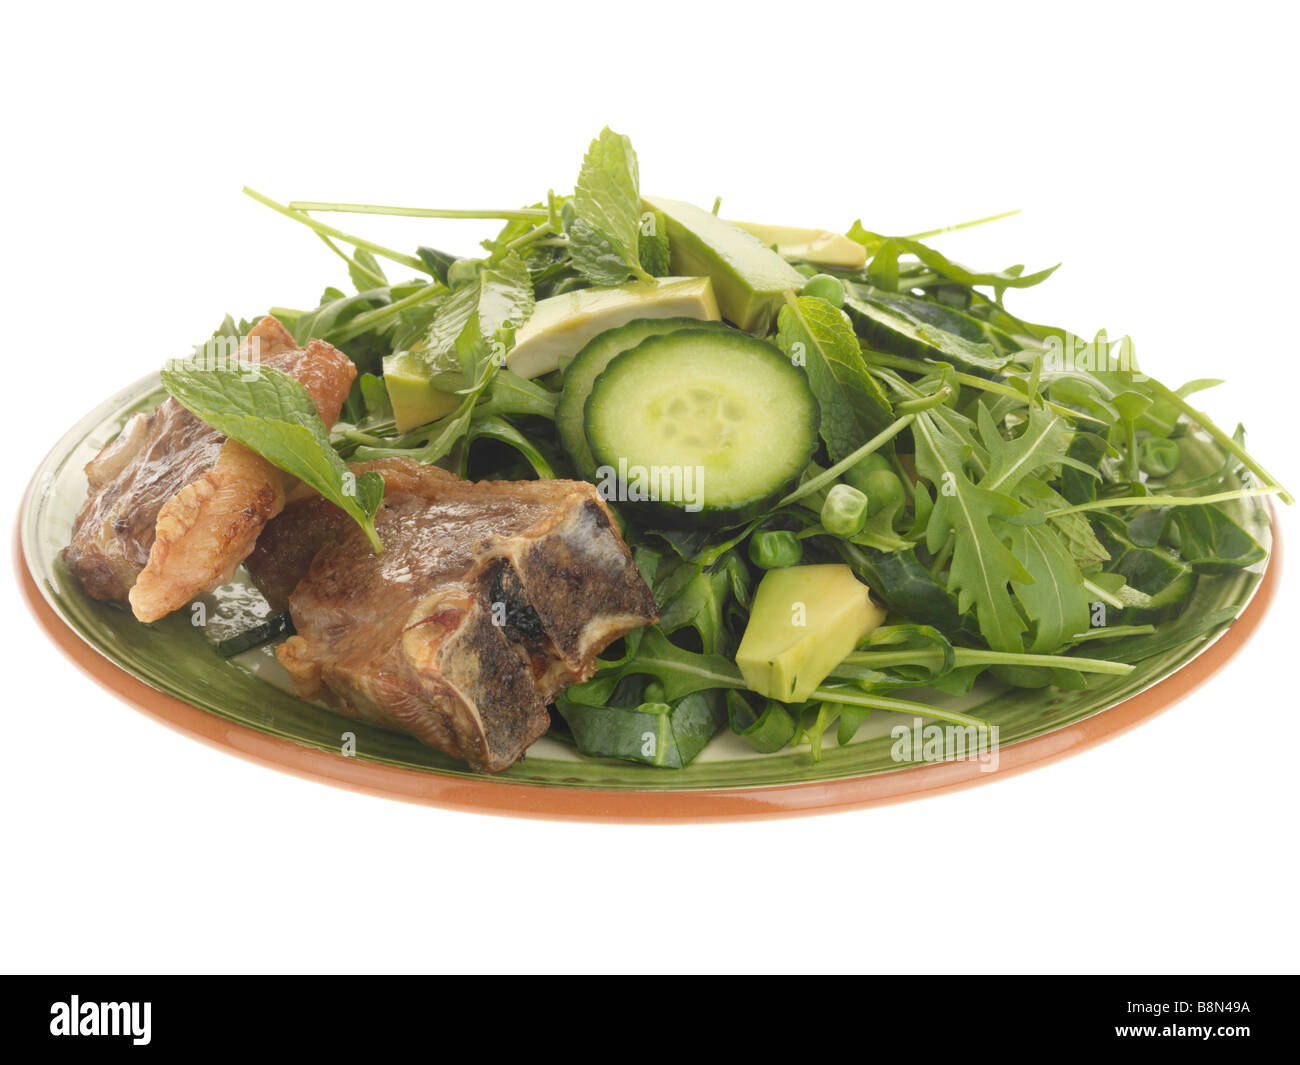 Freshly Cooked Tender Sweet Lamb Chops With Avocado Salad and Rocket leaves Isolated Against A White Background With No People And A Clipping Path Stock Photo